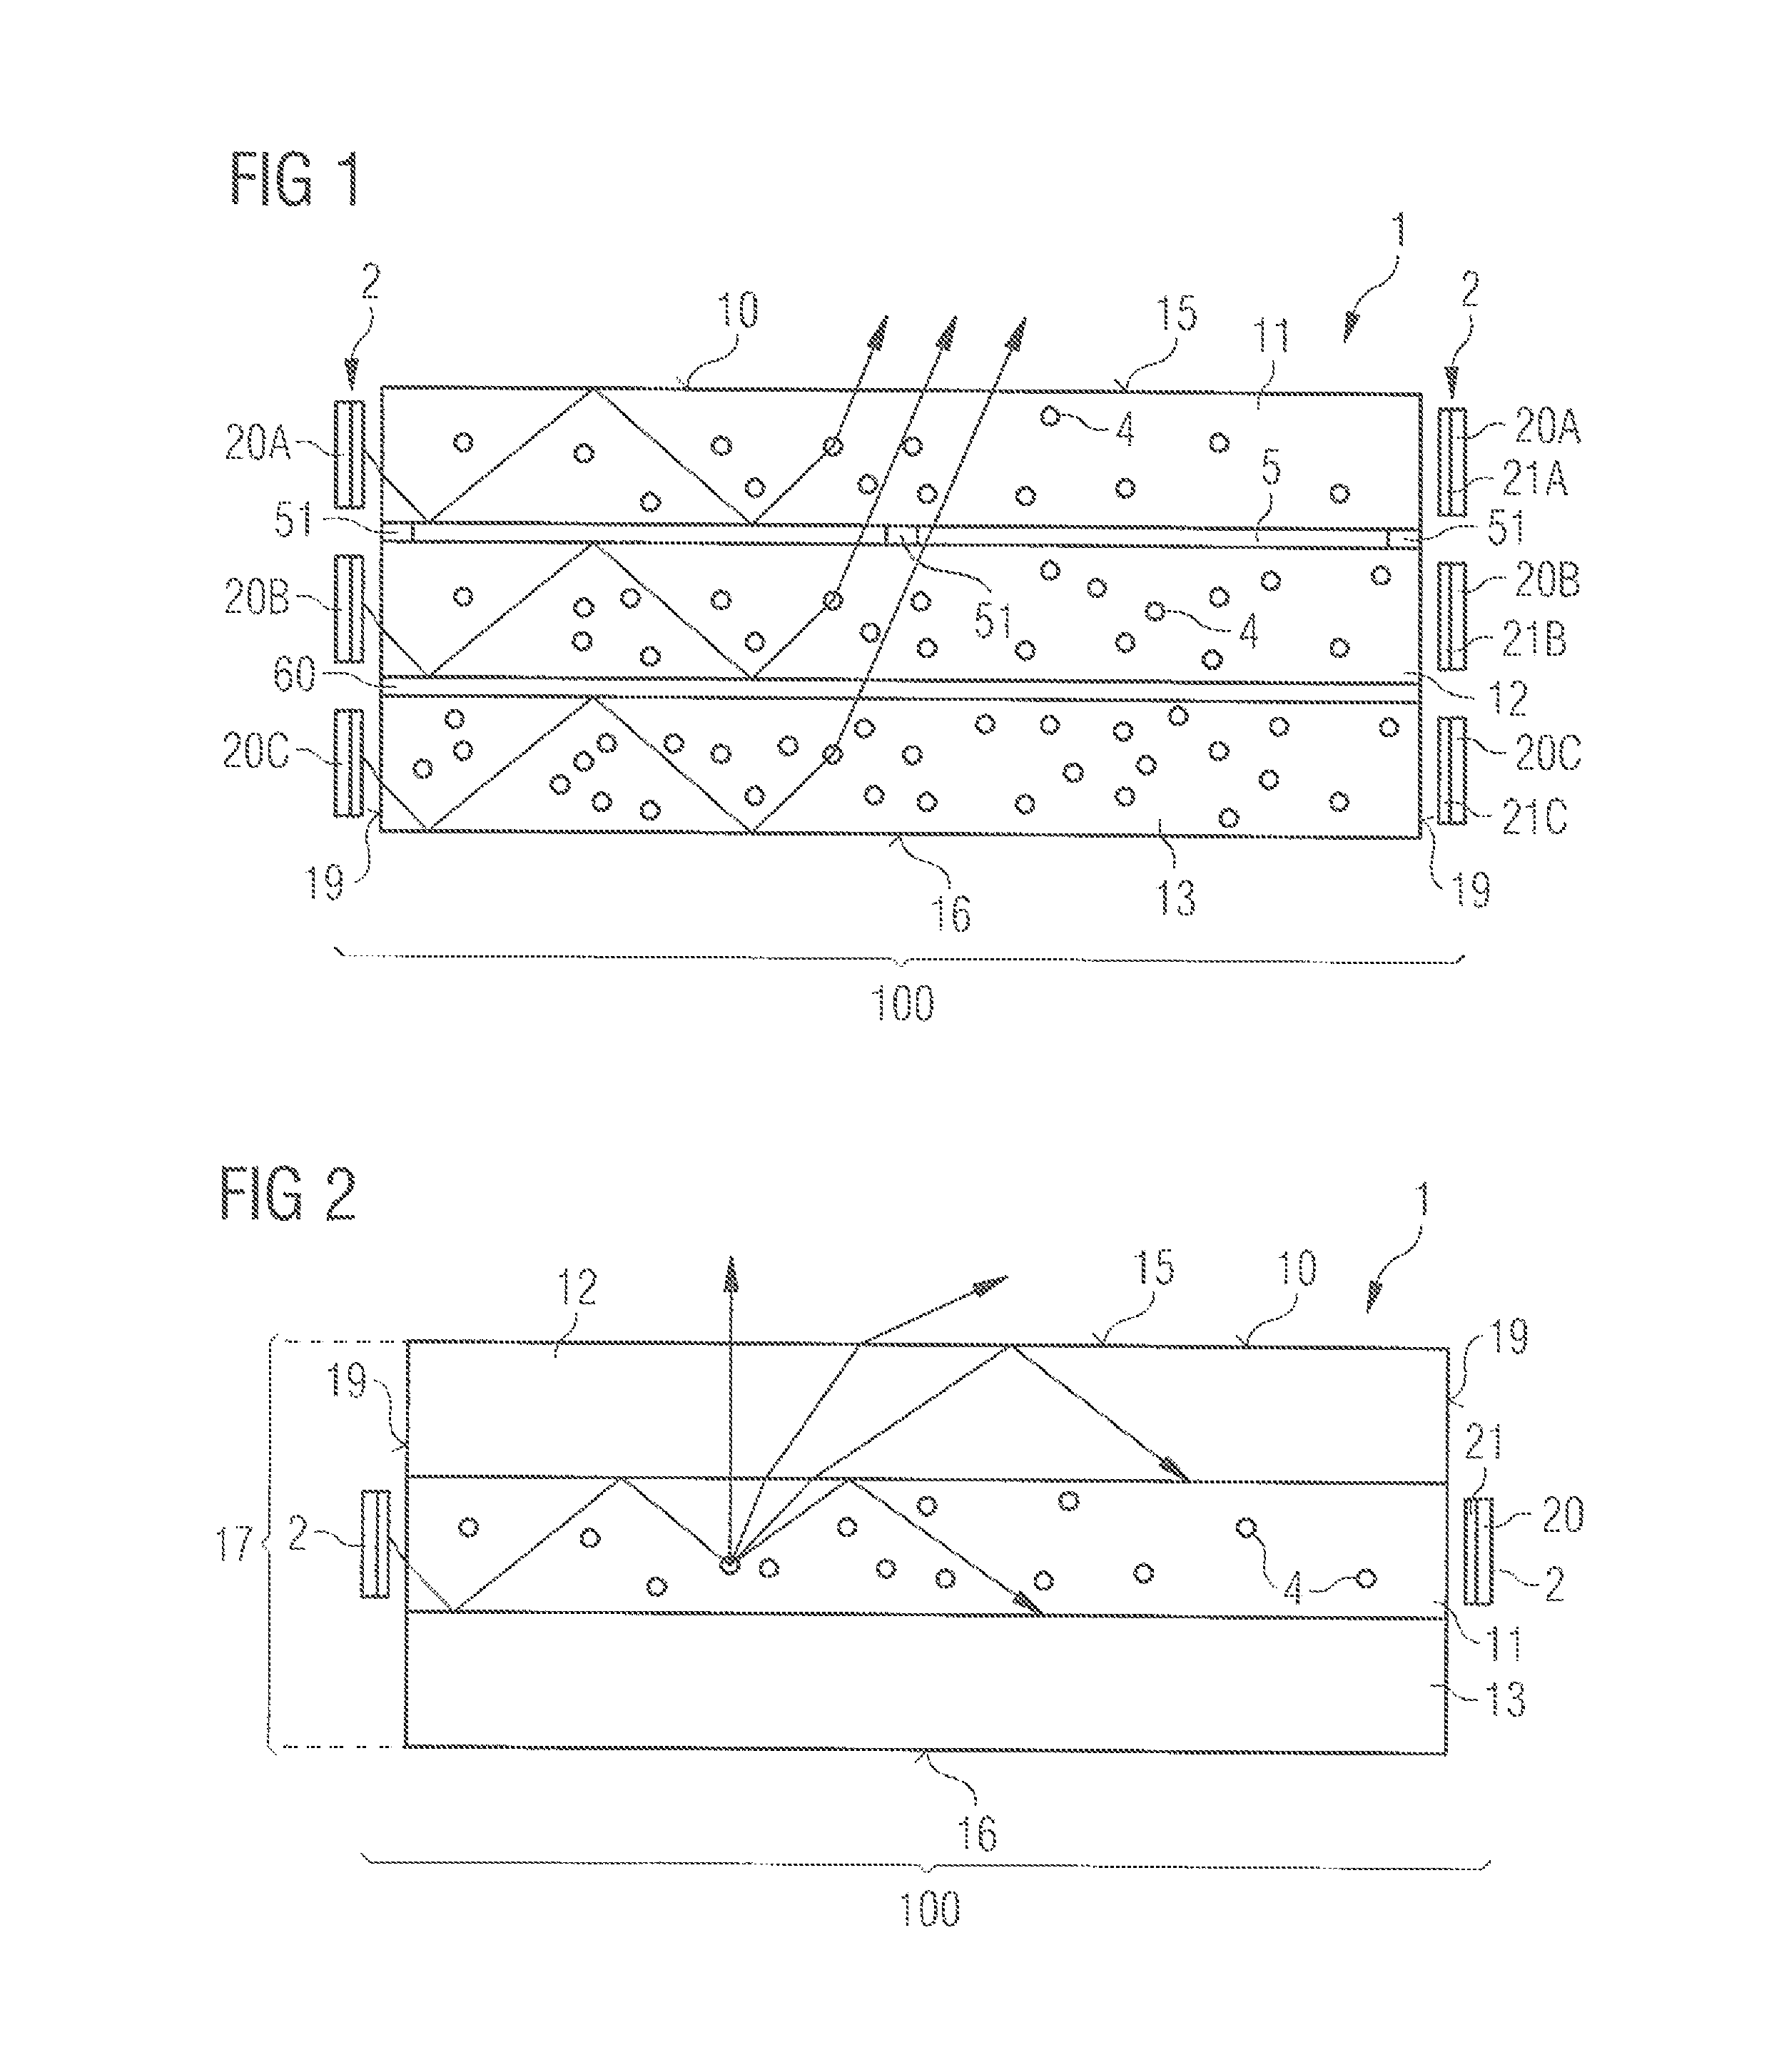 Surface light guide and planar emitter